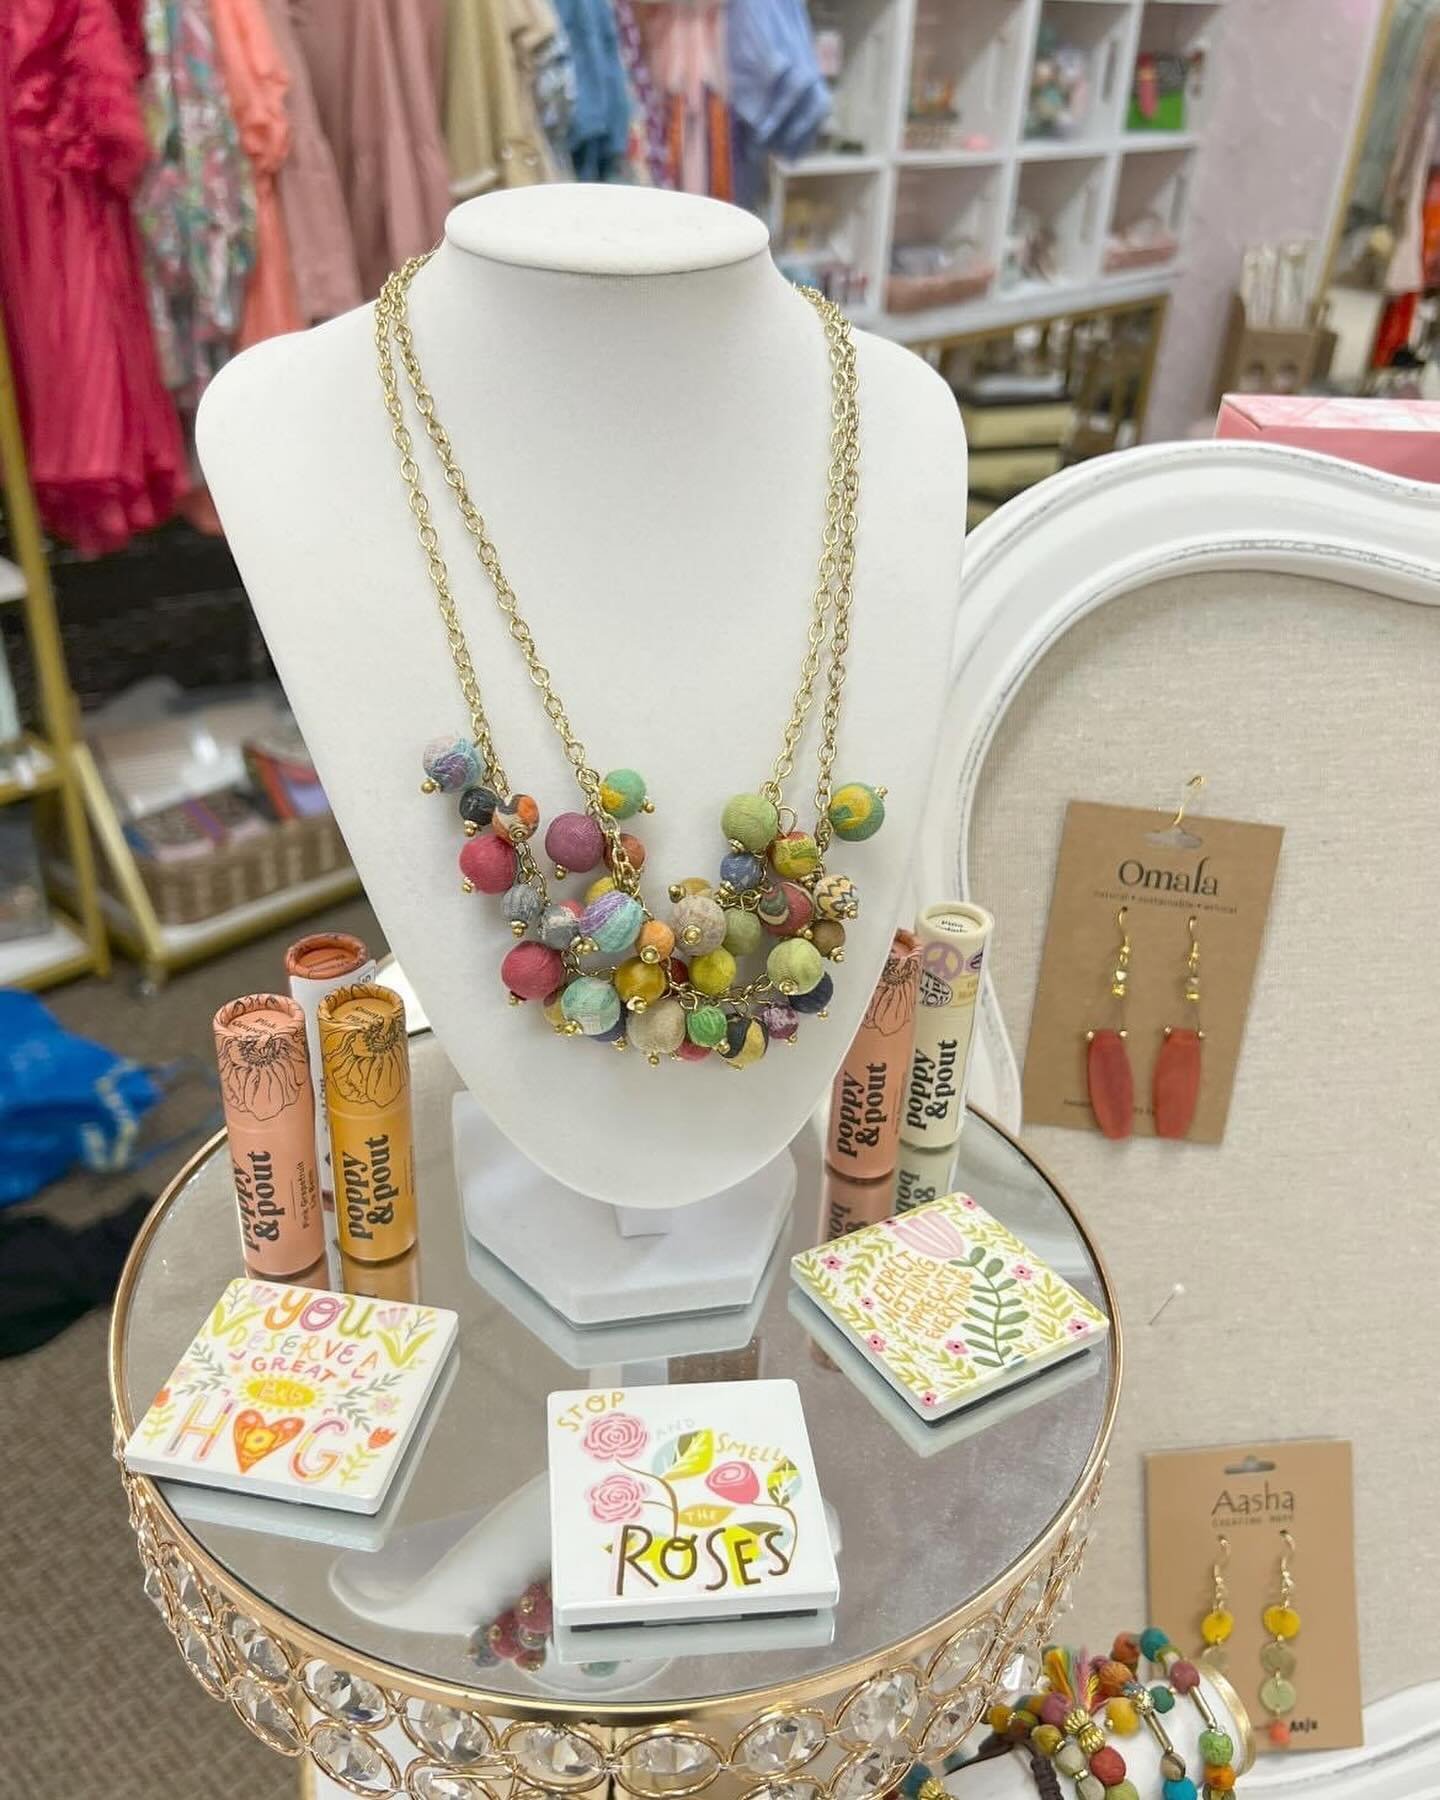 You can shop us 7 days a week at @southernlioncharlotte We have a fun filled booth of items for you to shop in this beautiful merchant market! Shop 60+ other shops here too! We&rsquo;ll be restocking our booth here on Monday 5/13 with Judy Blue Jeans